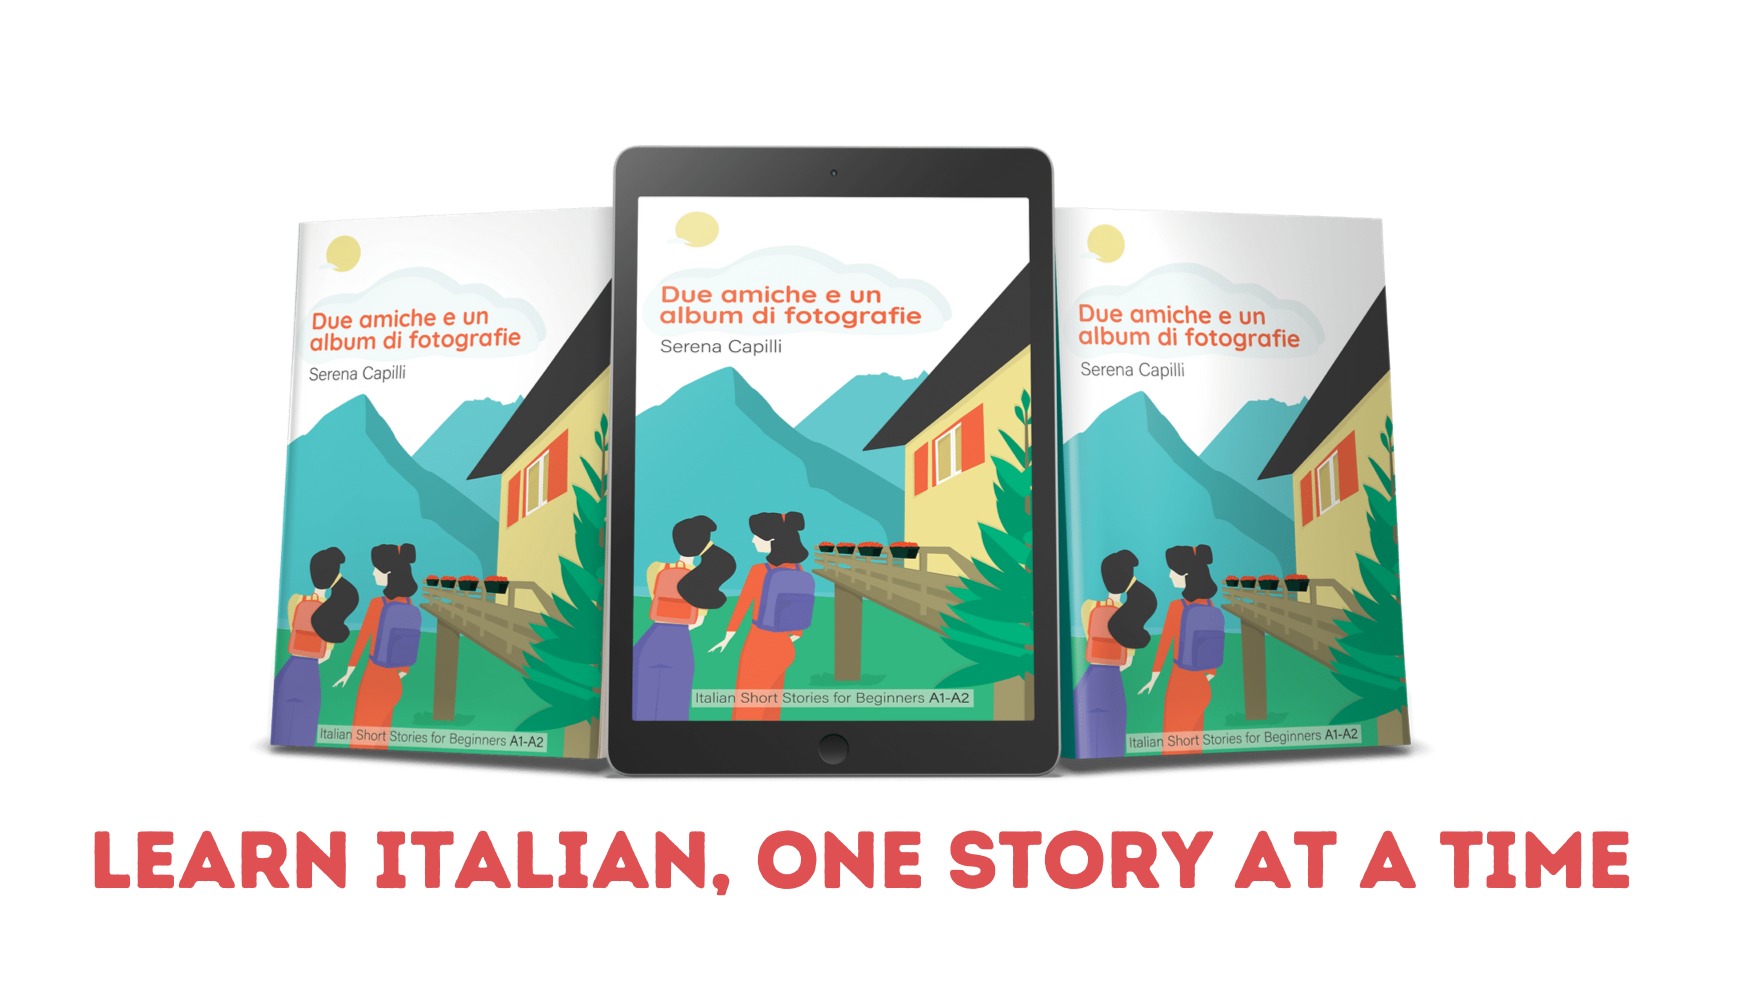 This is an easy-to-read Italian short story ebook, with each unit taking no more than 10-20 minutes to complete. This book course, designed for English speakers, is intended for both false beginners as well as intermediate students looking to brush up on their skills. The story takes place in one of Italy's most beautiful regions, South Tyrol (or Alto Adige), and revolves around Costanza, who goes on a summer adventure in the Dolomites with her friend Anna. The book is divided into 16 short units, with useful vocabulary and explanations in English at the end. This short story series is ideal for those who want to learn about the culture, food, and way of life in various Italian regions as well as the language. This ebooks is completed with an audiobook narrated by the author. This ebook is completed with an audiobook read by the author.